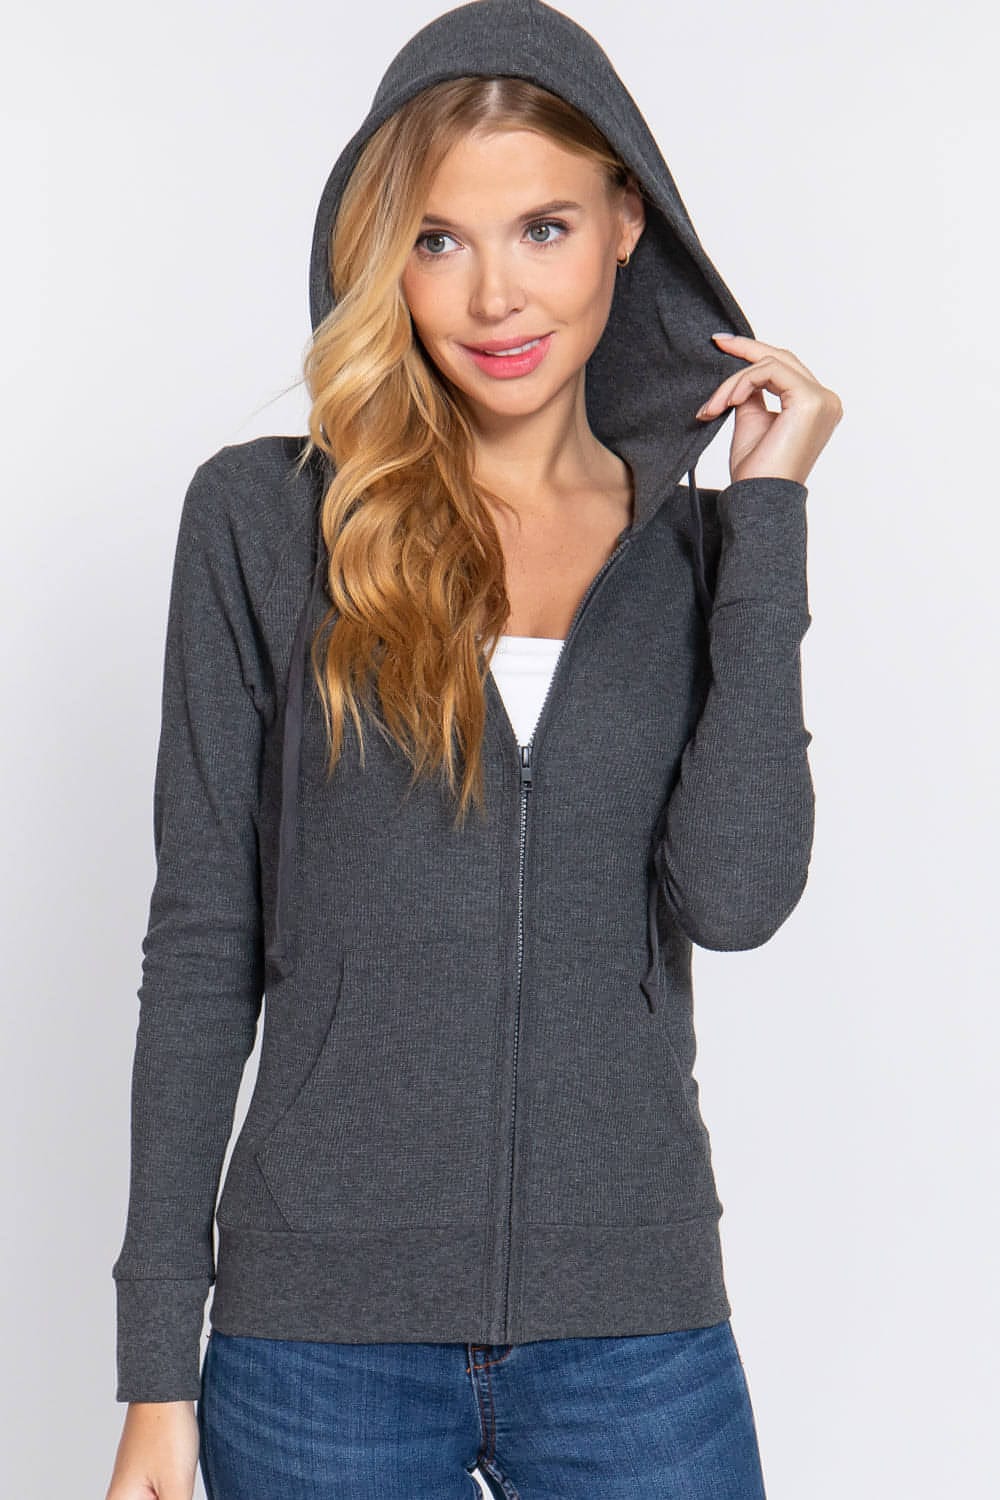 a woman wearing a gray hoodie and jeans